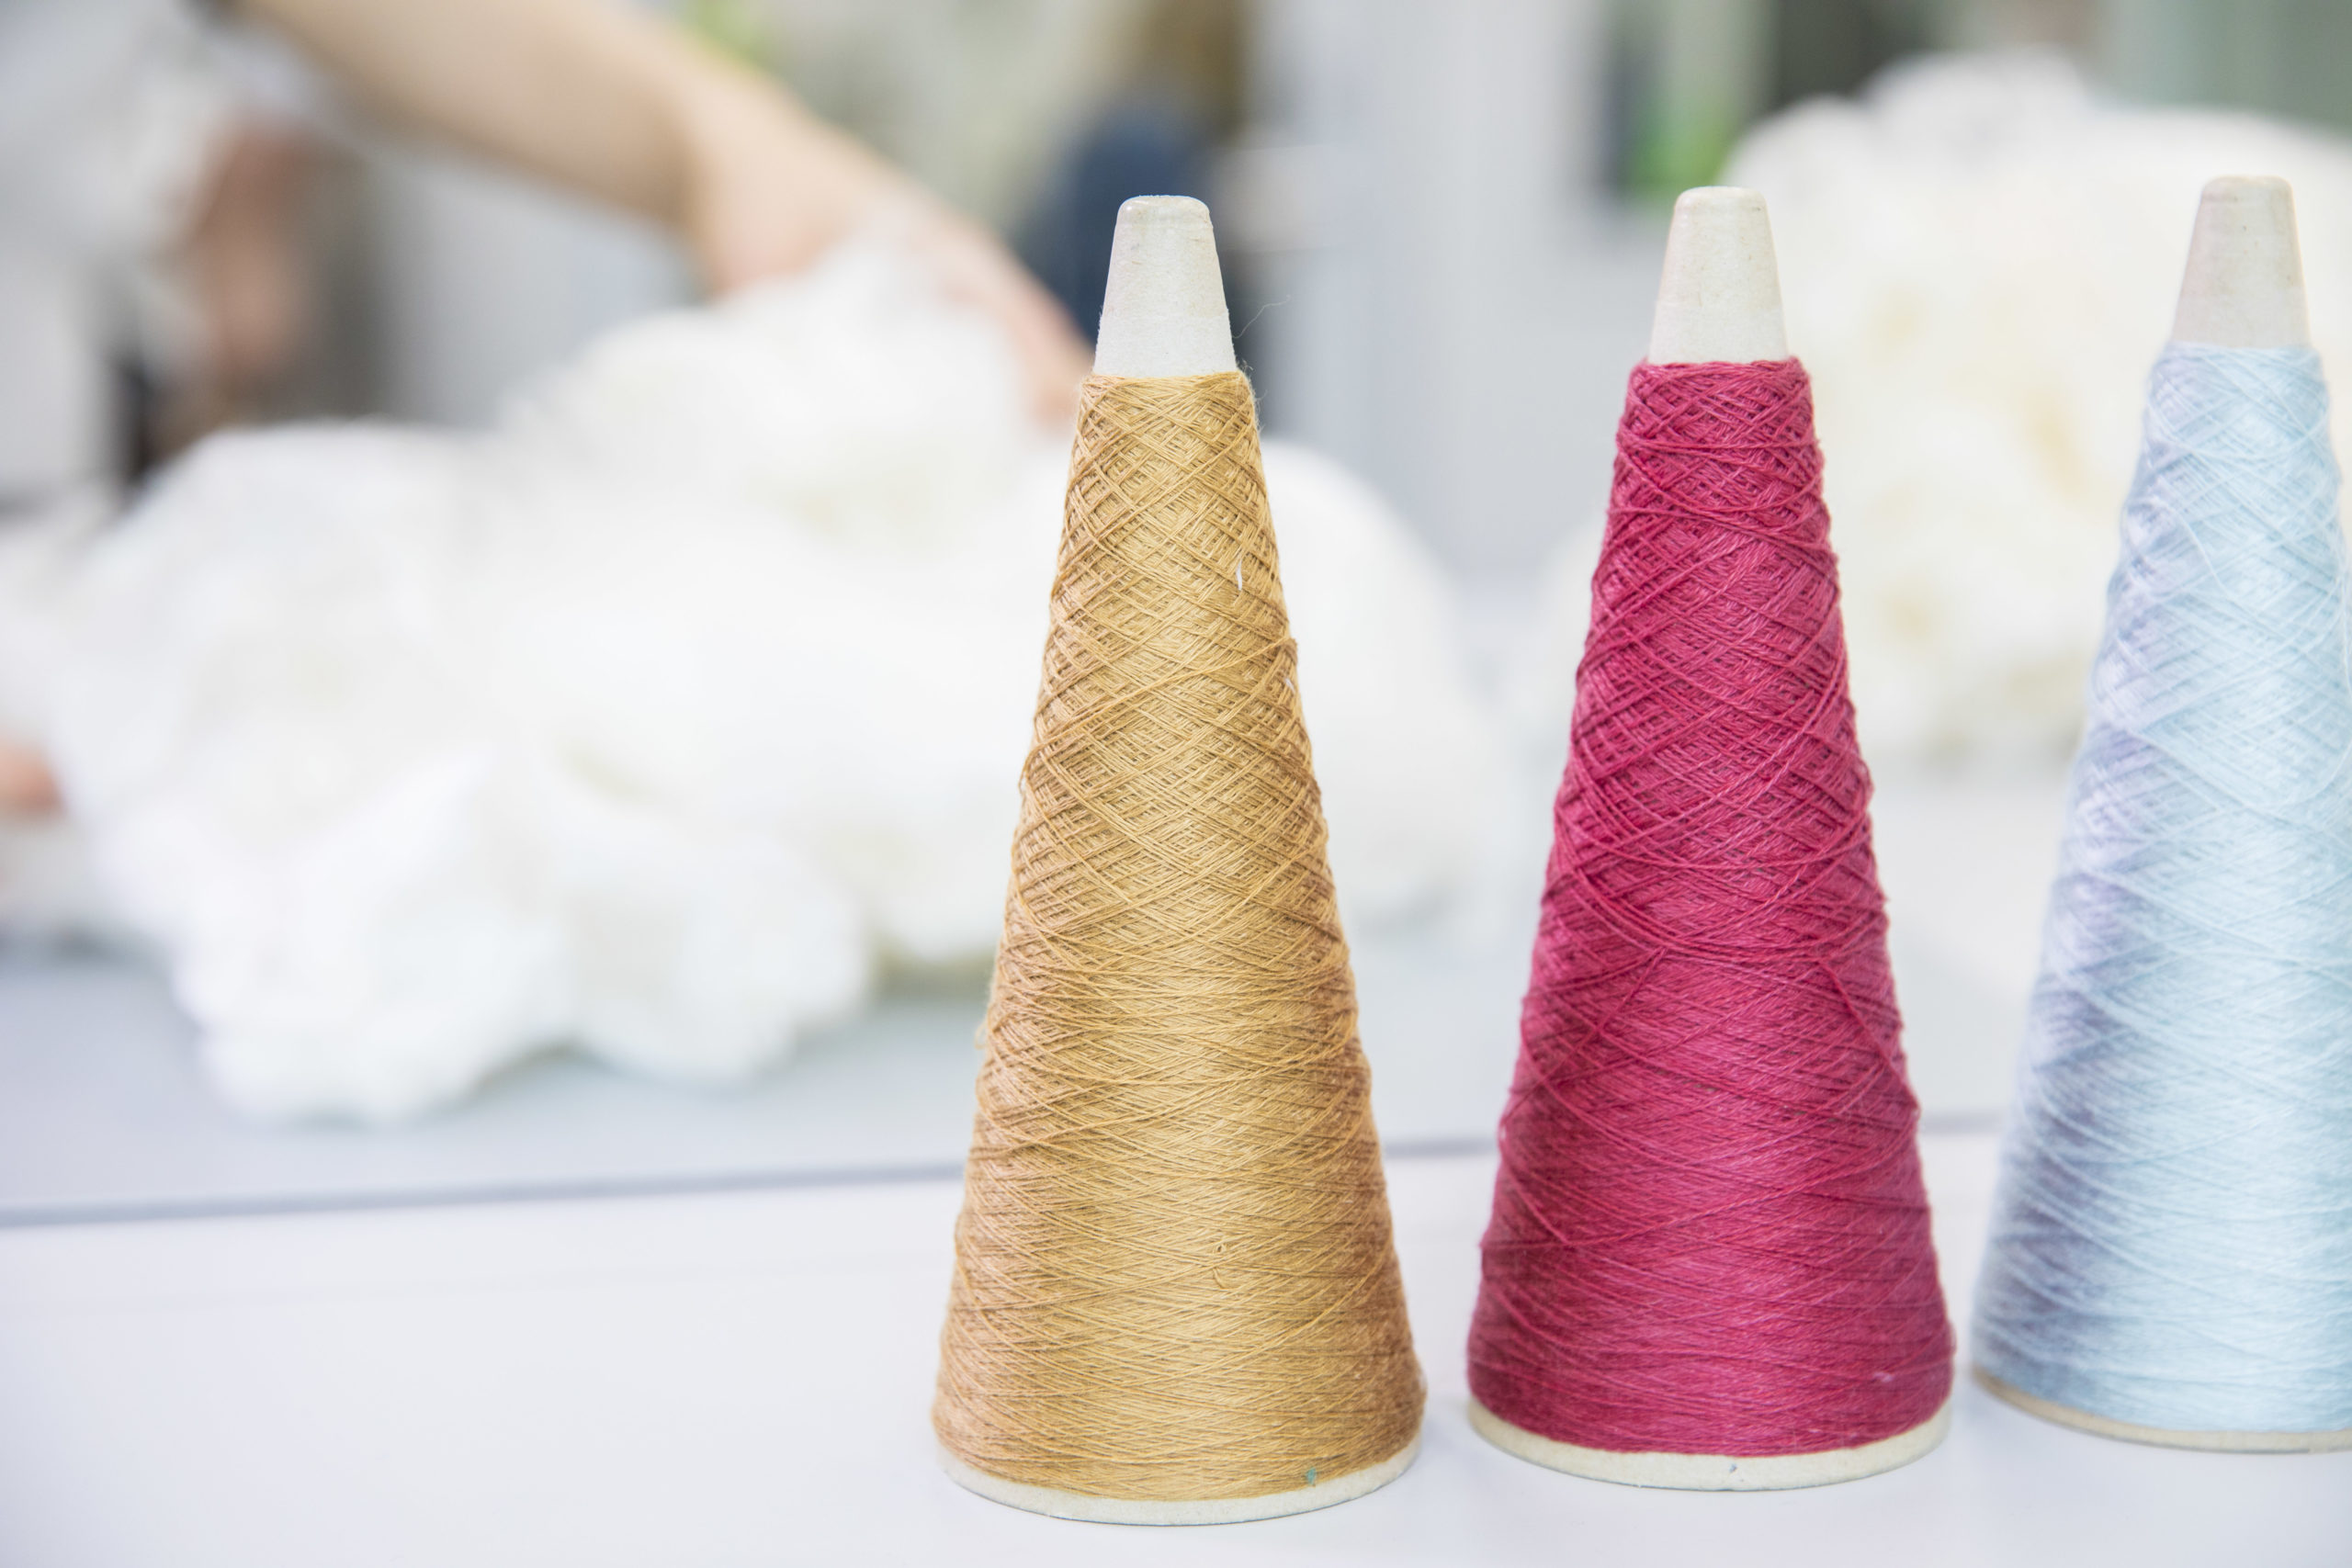 FinnFiberColor project develops sustainable solutions for man-made cellulose fiber processes